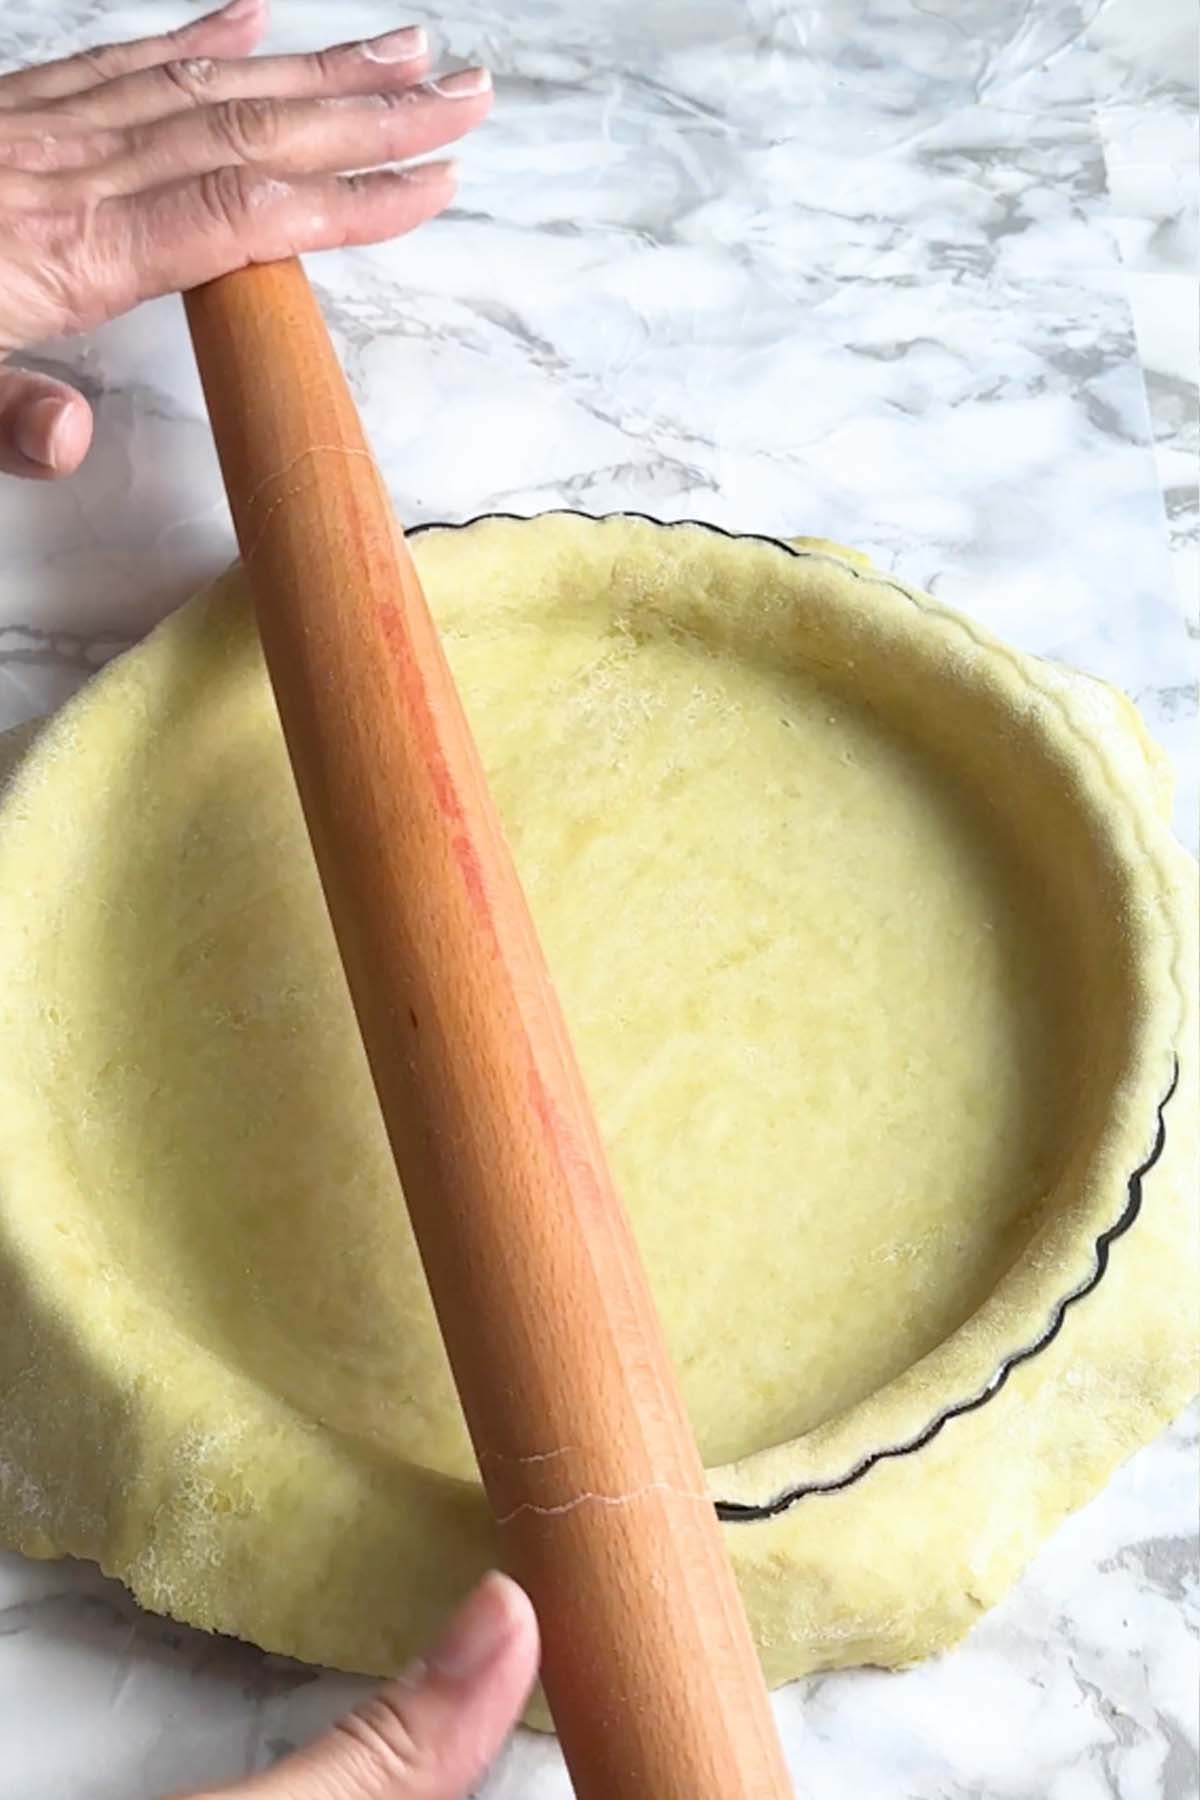 Excess pie dough is cut by rolling a rolling pin on the edges of a pie tin.